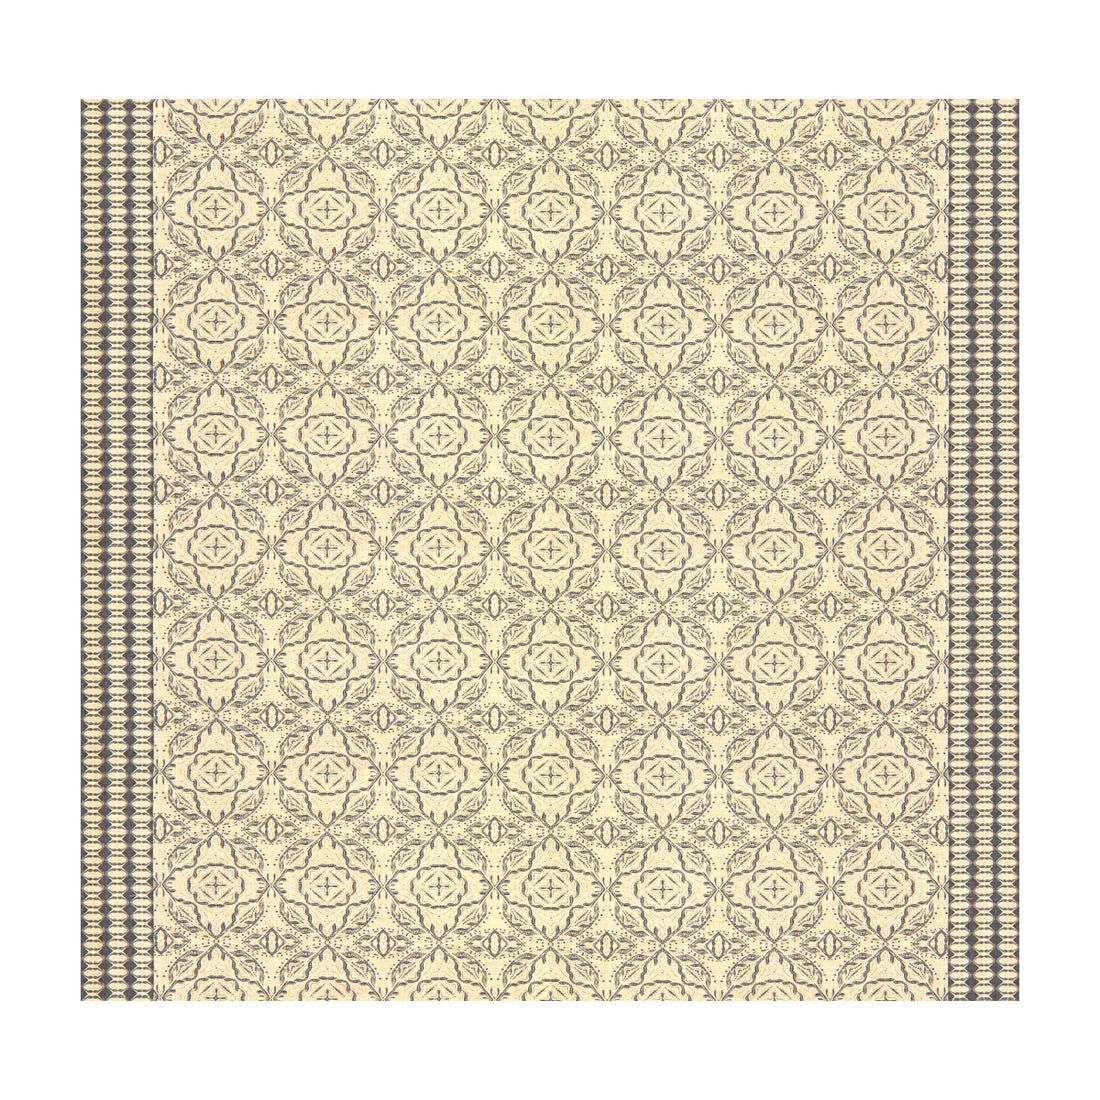 Maze fabric in metal color - pattern GWF-3506.11.0 - by Lee Jofa Modern in the Allegra Hicks Garden collection